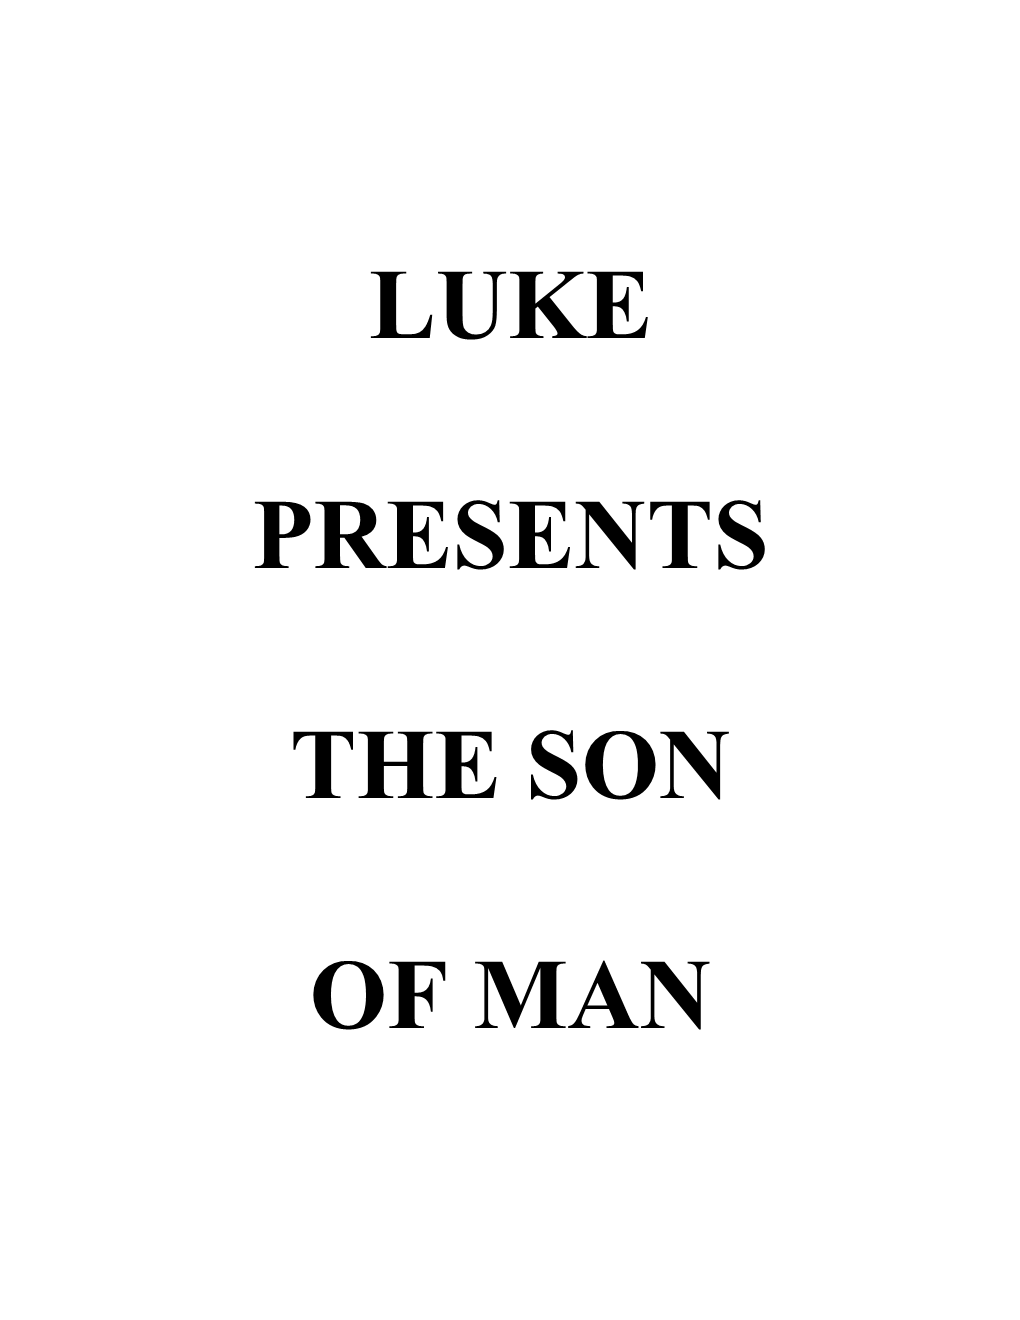 1.Who Was Luke? Give As Many Details As You Can About Him